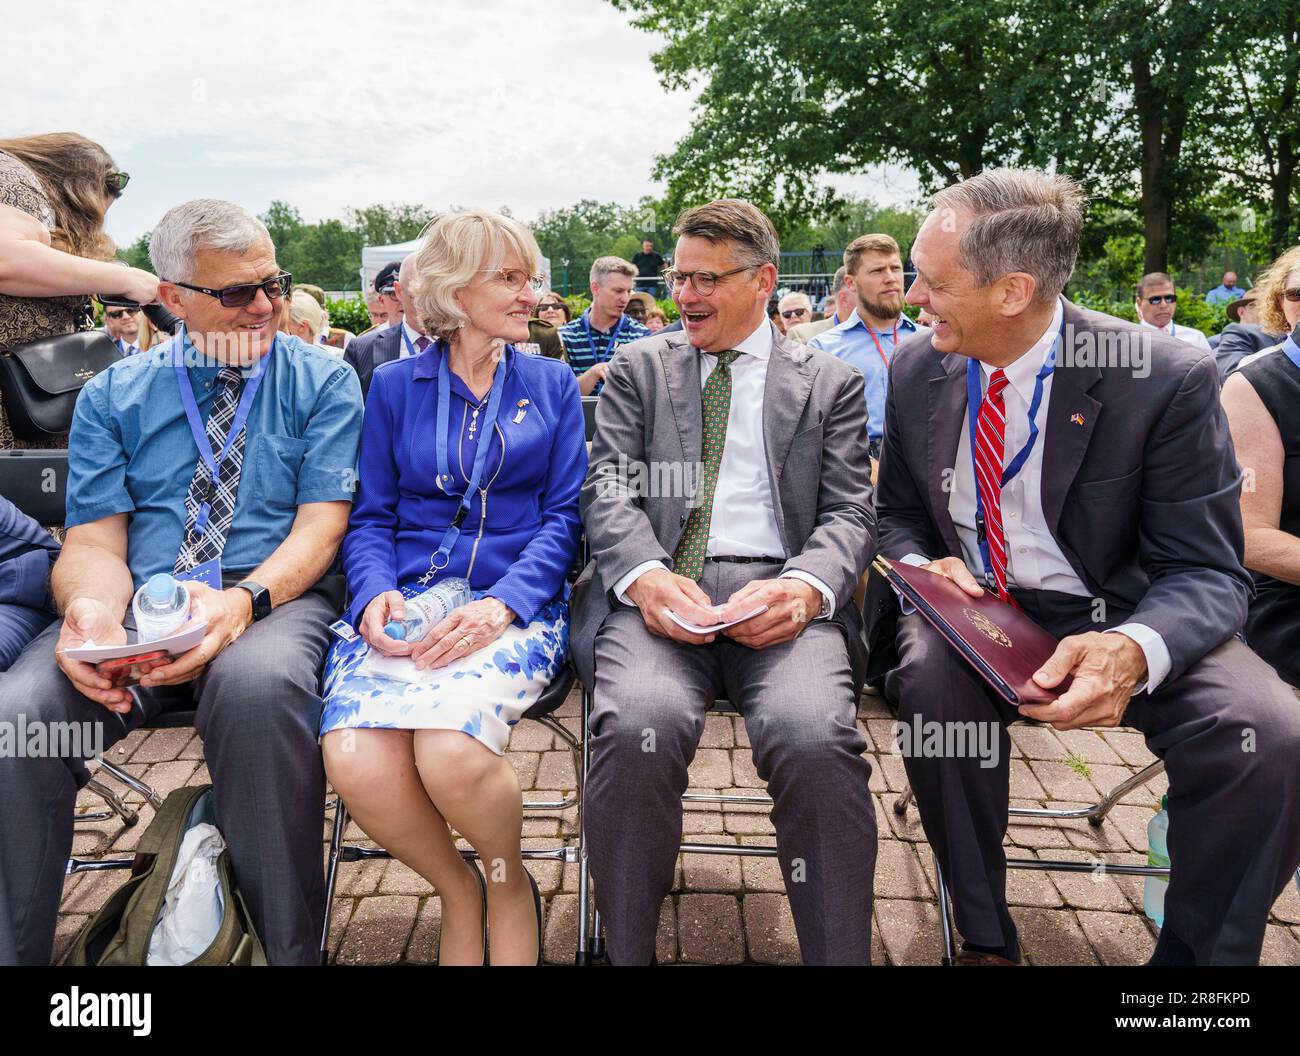 21 June 2023, Hesse, Frankfurt/Main: David Williams (l-r), husband of Denise Halvorsen-Williams, Denise Halvorsen-Williams, daughter of Airlift pilot Gail Halvorsen, Boris Rhein (CDU), Minister President of Hesse, and Norman Thatcher Scharpf, Consul General at the U.S. Consulate General in Frankfurt, sit together. A wreath-laying ceremony at the Airlift Memorial commemorates the Airlift 75 years ago. Among others, representatives of the former Allied Western powers, the chairman of the Airlift Association, and the daughter of one of the pilots involved at the time take part in the event. Photo Stock Photo